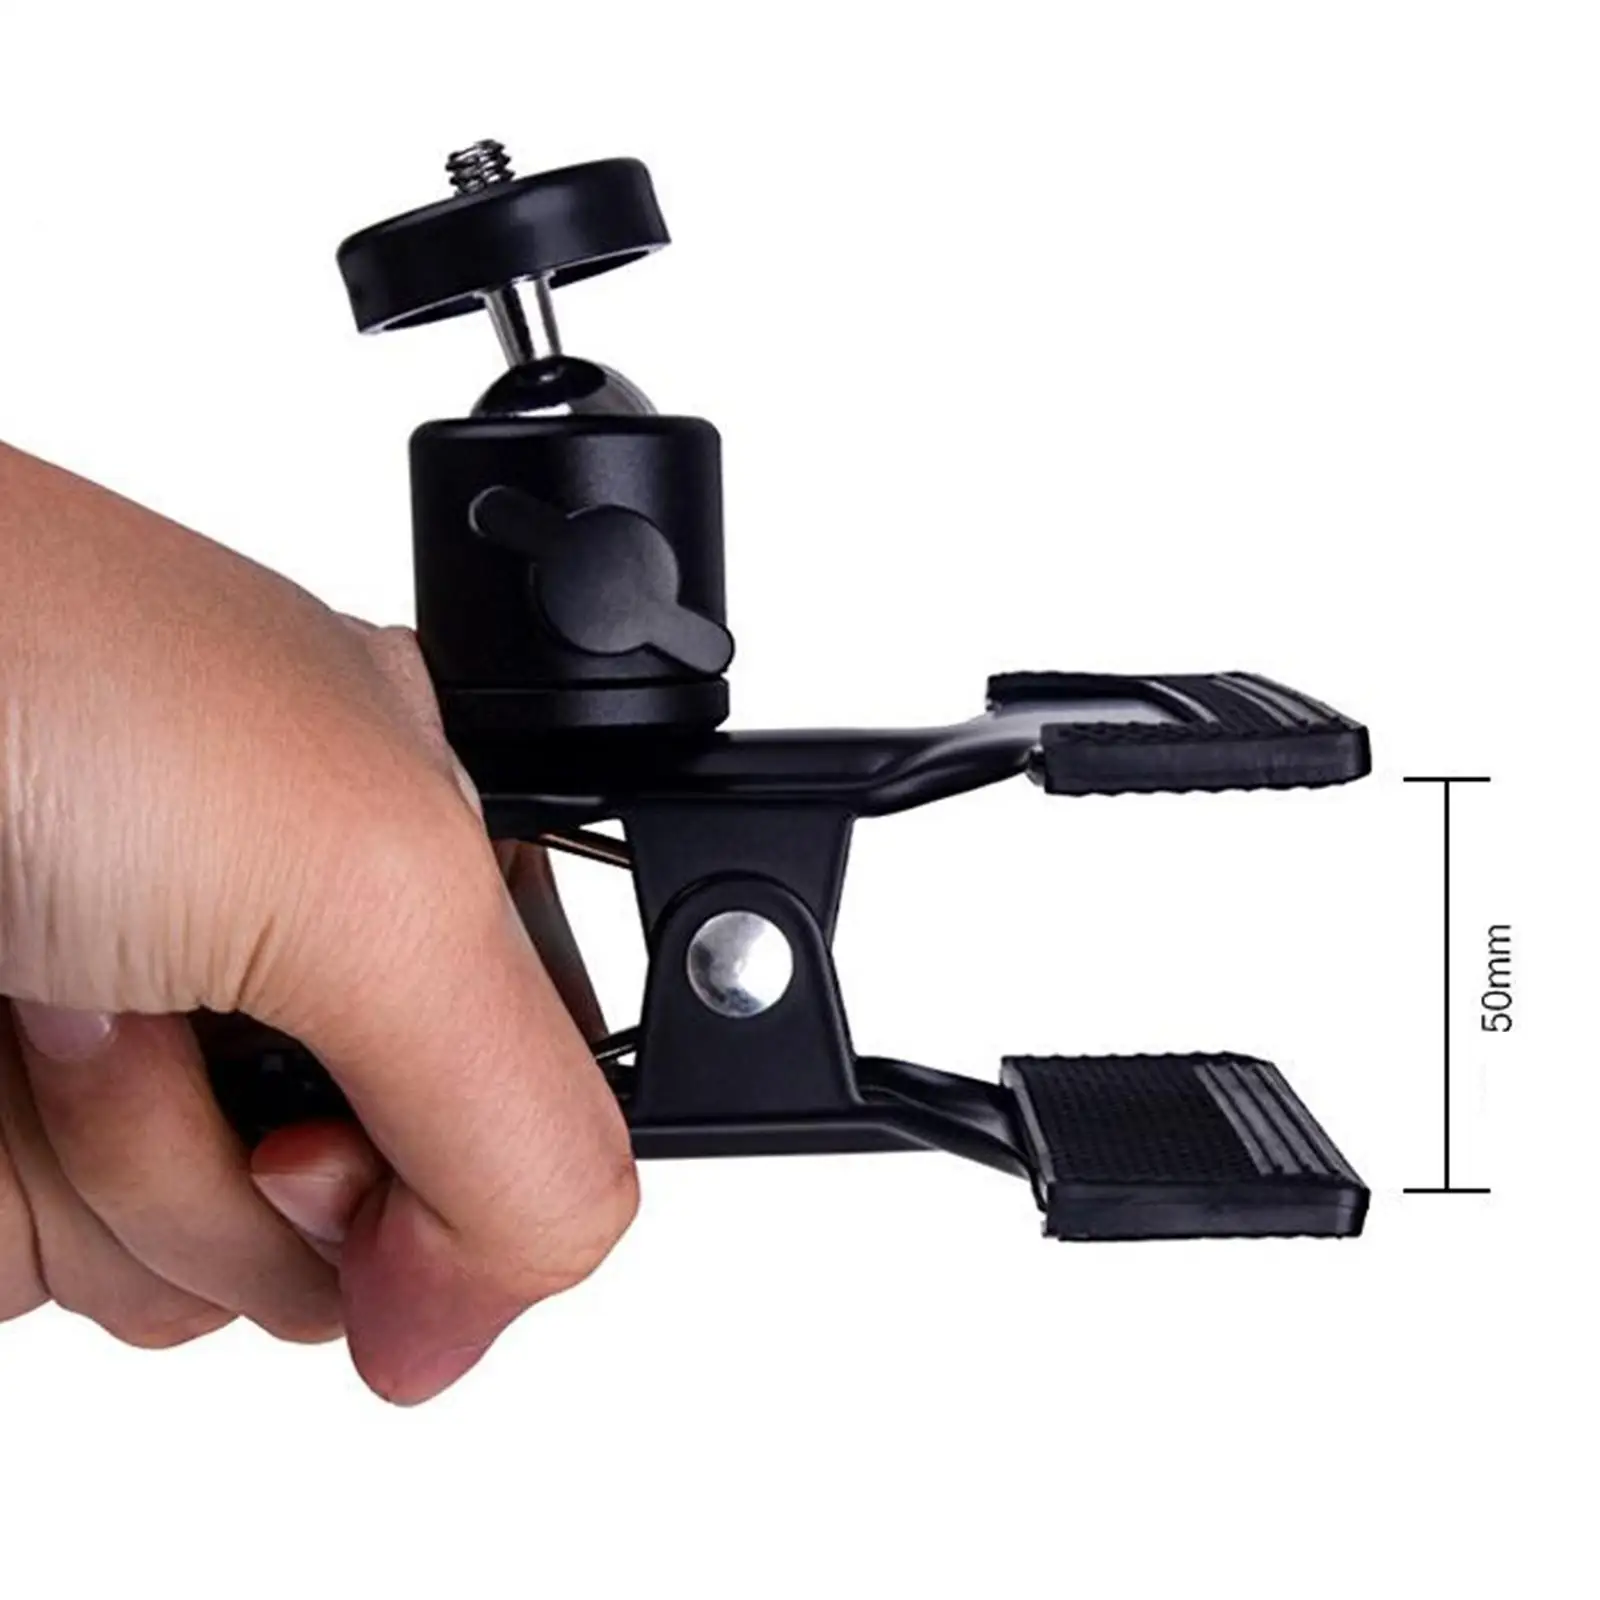 Guitar Headstock Clip On Mount For SmartPhones & Most Cameras,Close Up Home